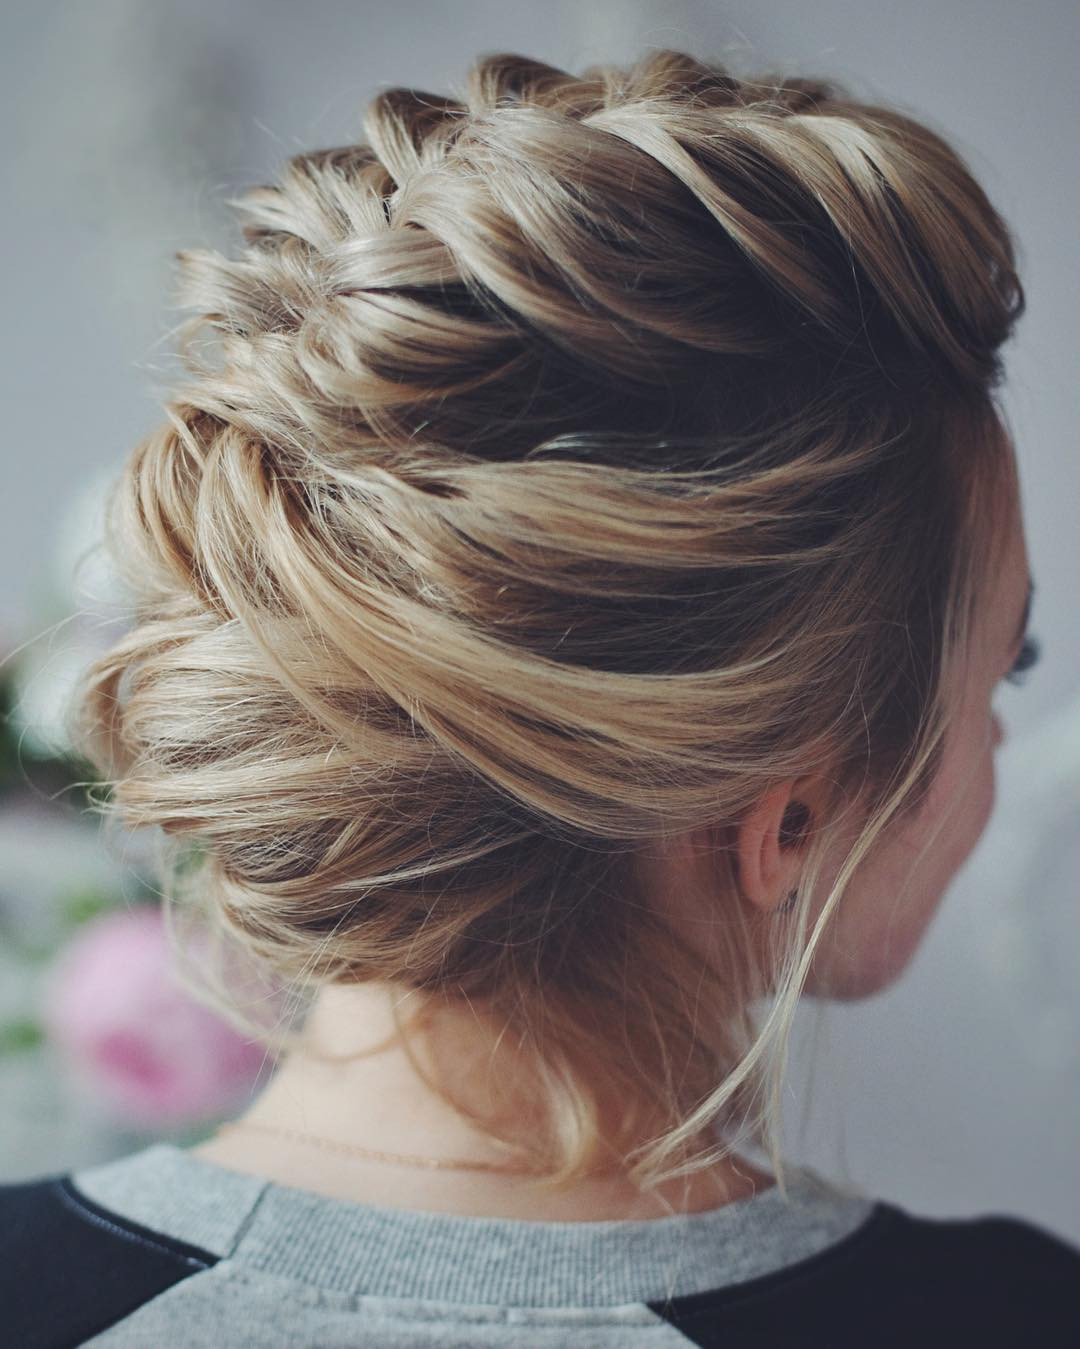 Prom Hairstyles Up
 Prom Hairstyles Easy Prom Hairstyles for Short and Medium